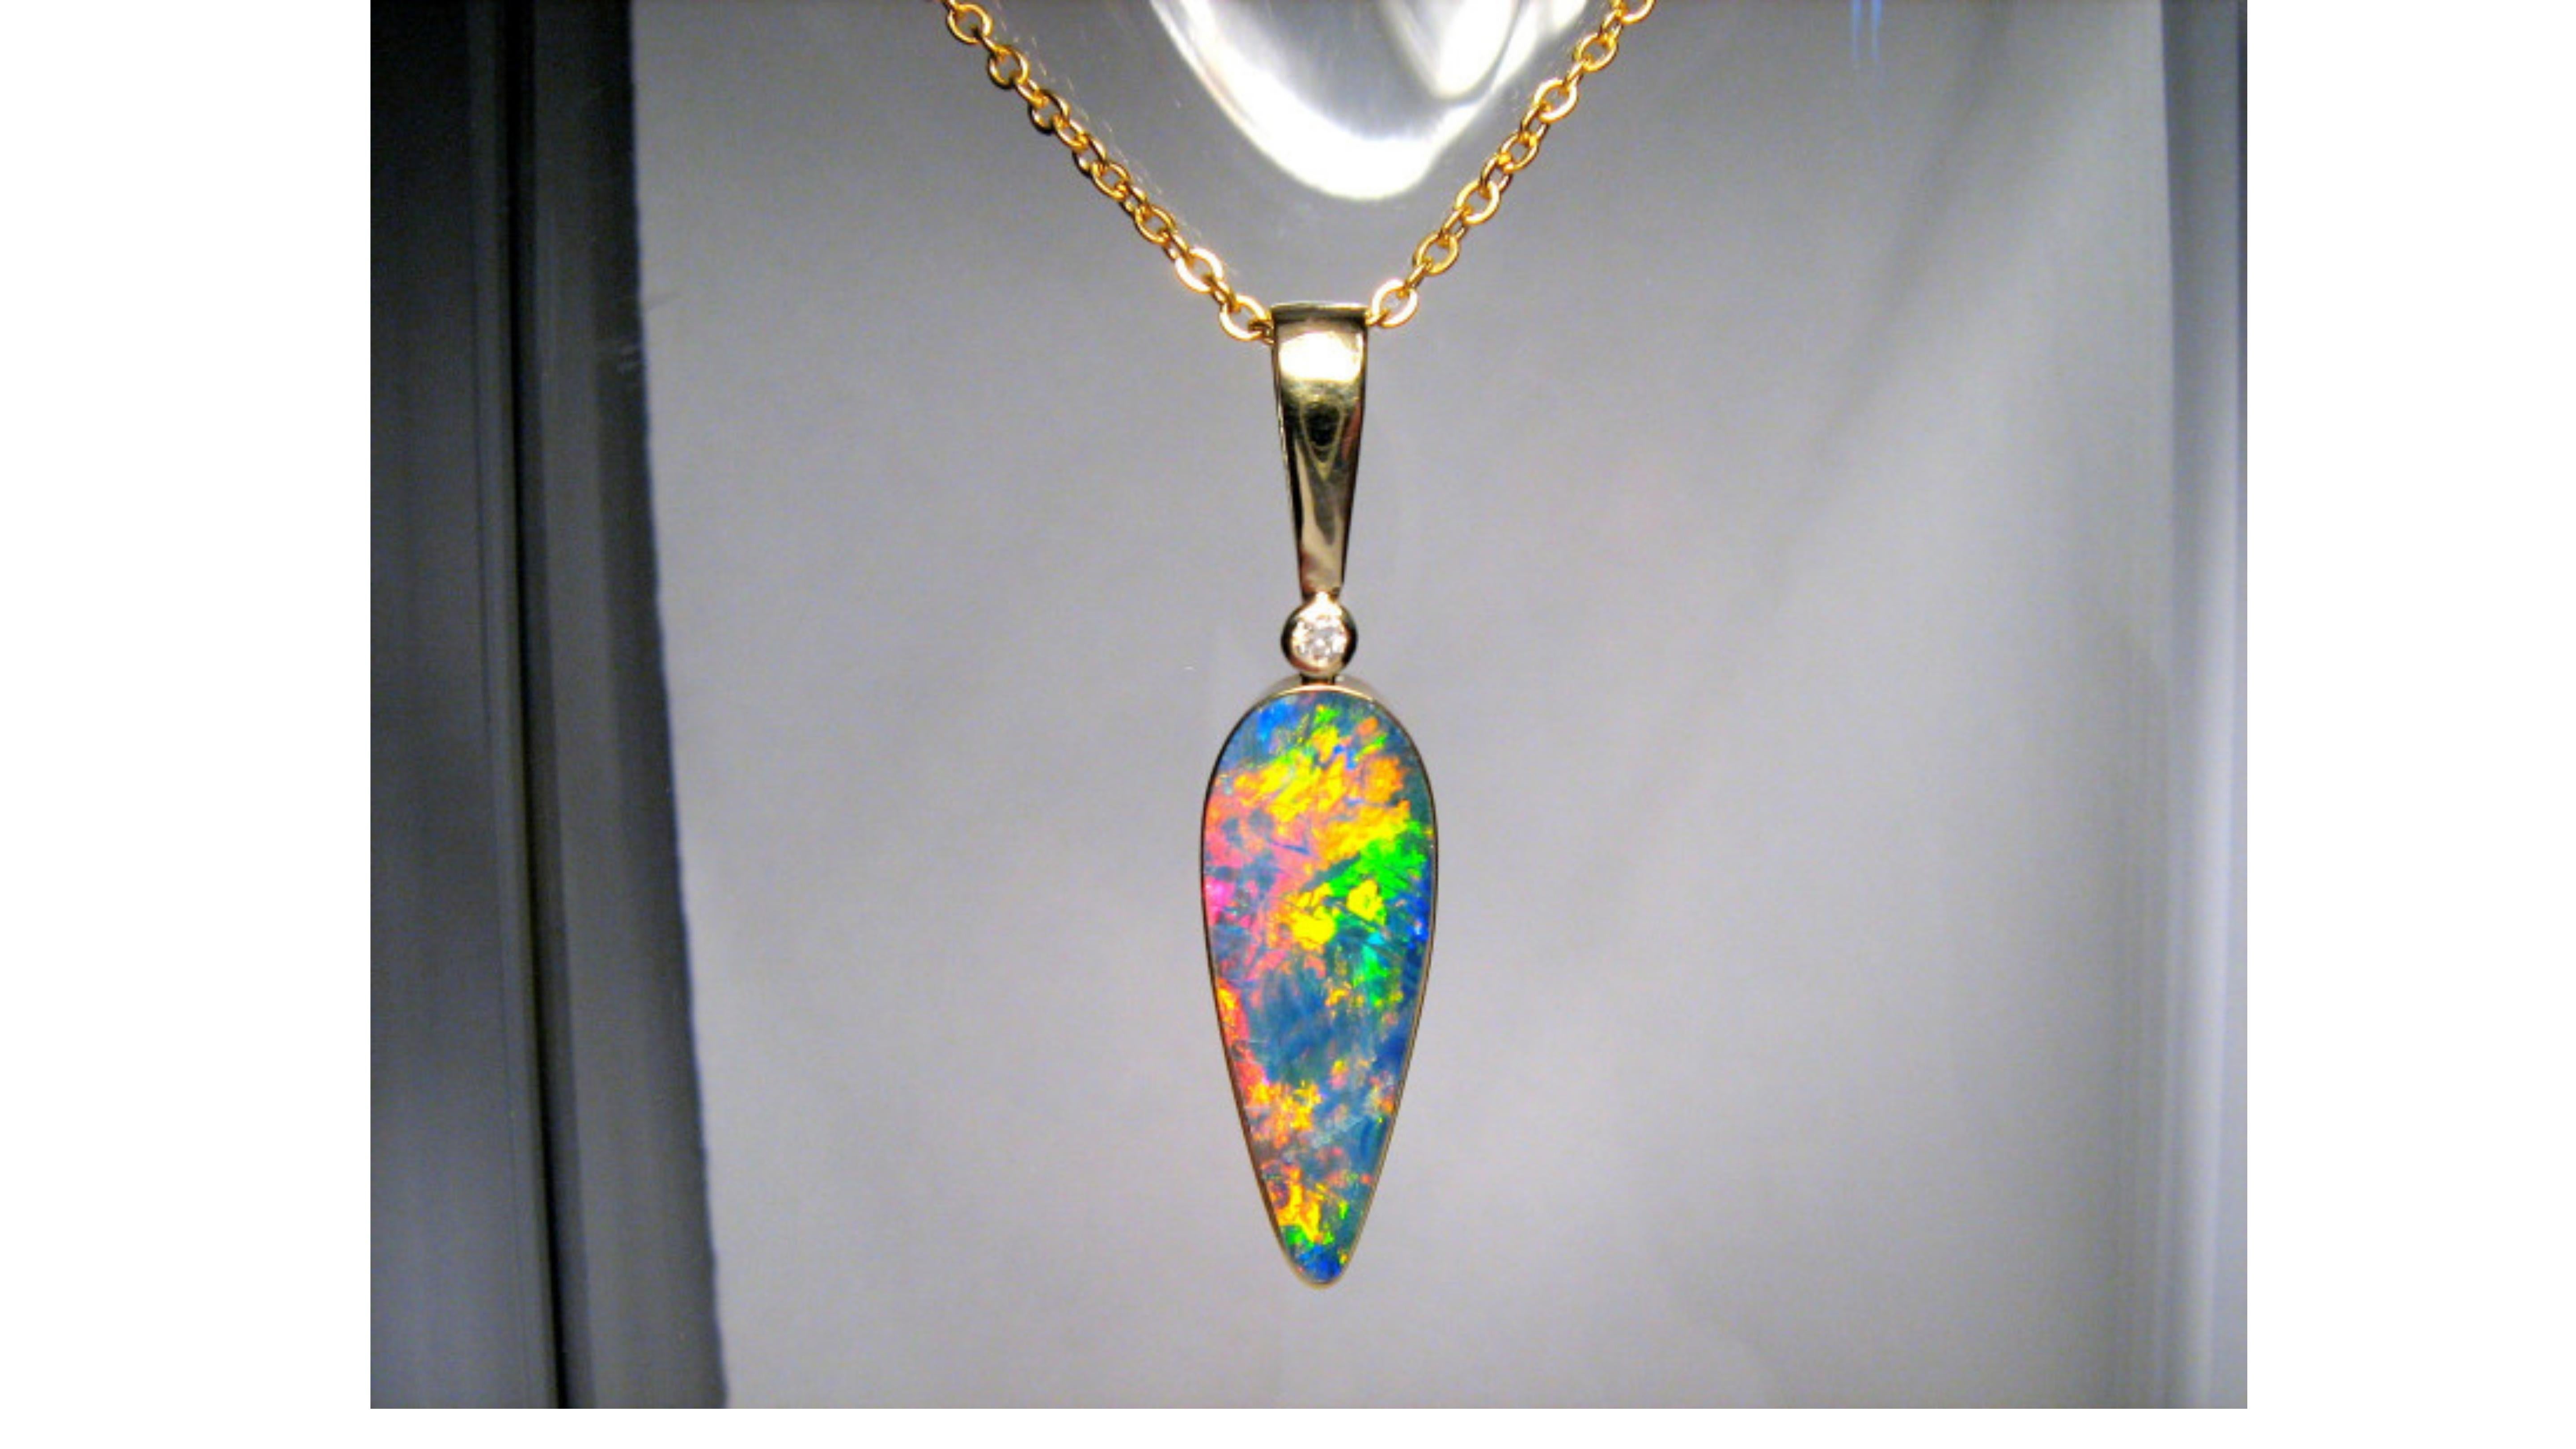 

Australian Opal Necklace 14 Karat Yellow Gold . This shows off very bright colors  Blue Yellow Green Orange Pink Red and really does stand out with the diamond too at the top. It comes from Coober Pedy in South West Australia.   A true one of a